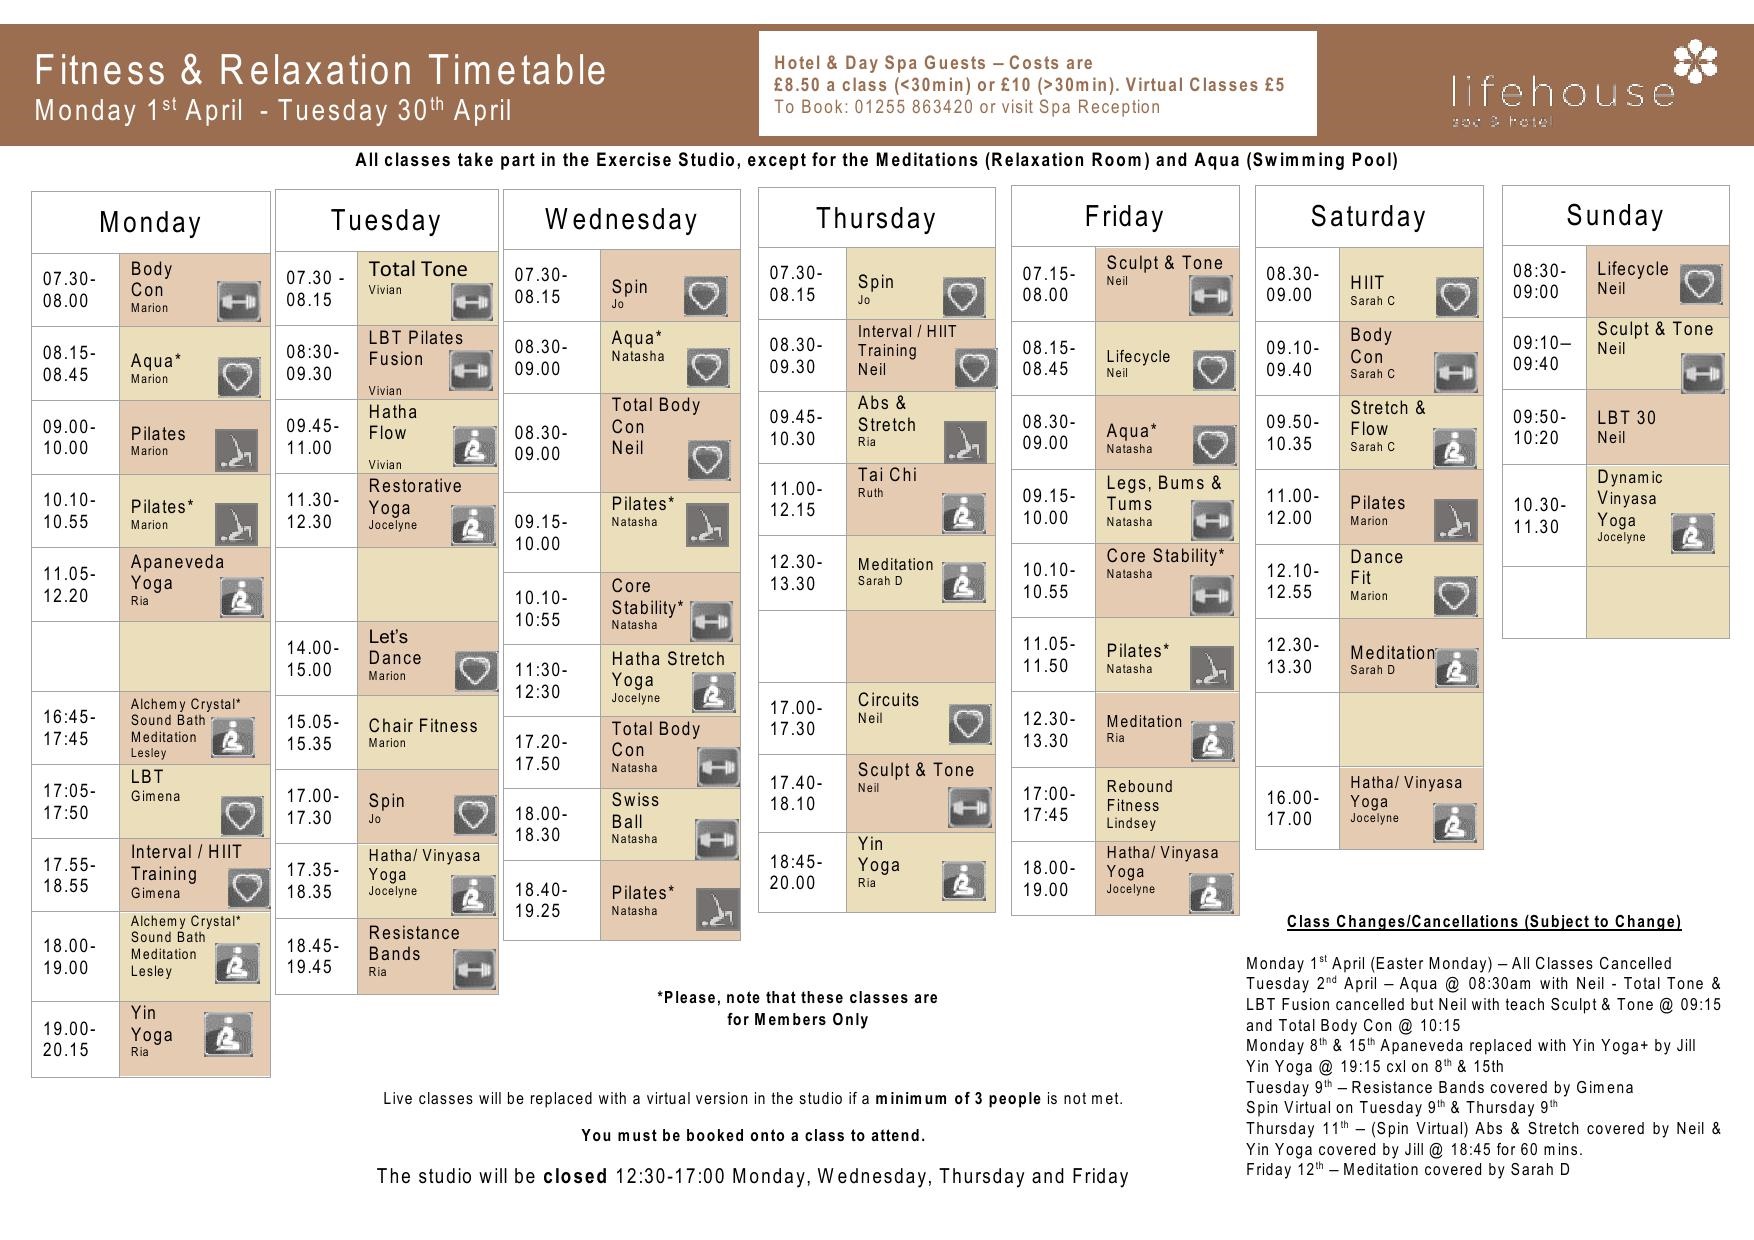 April Fitness & Relaxation Timetable